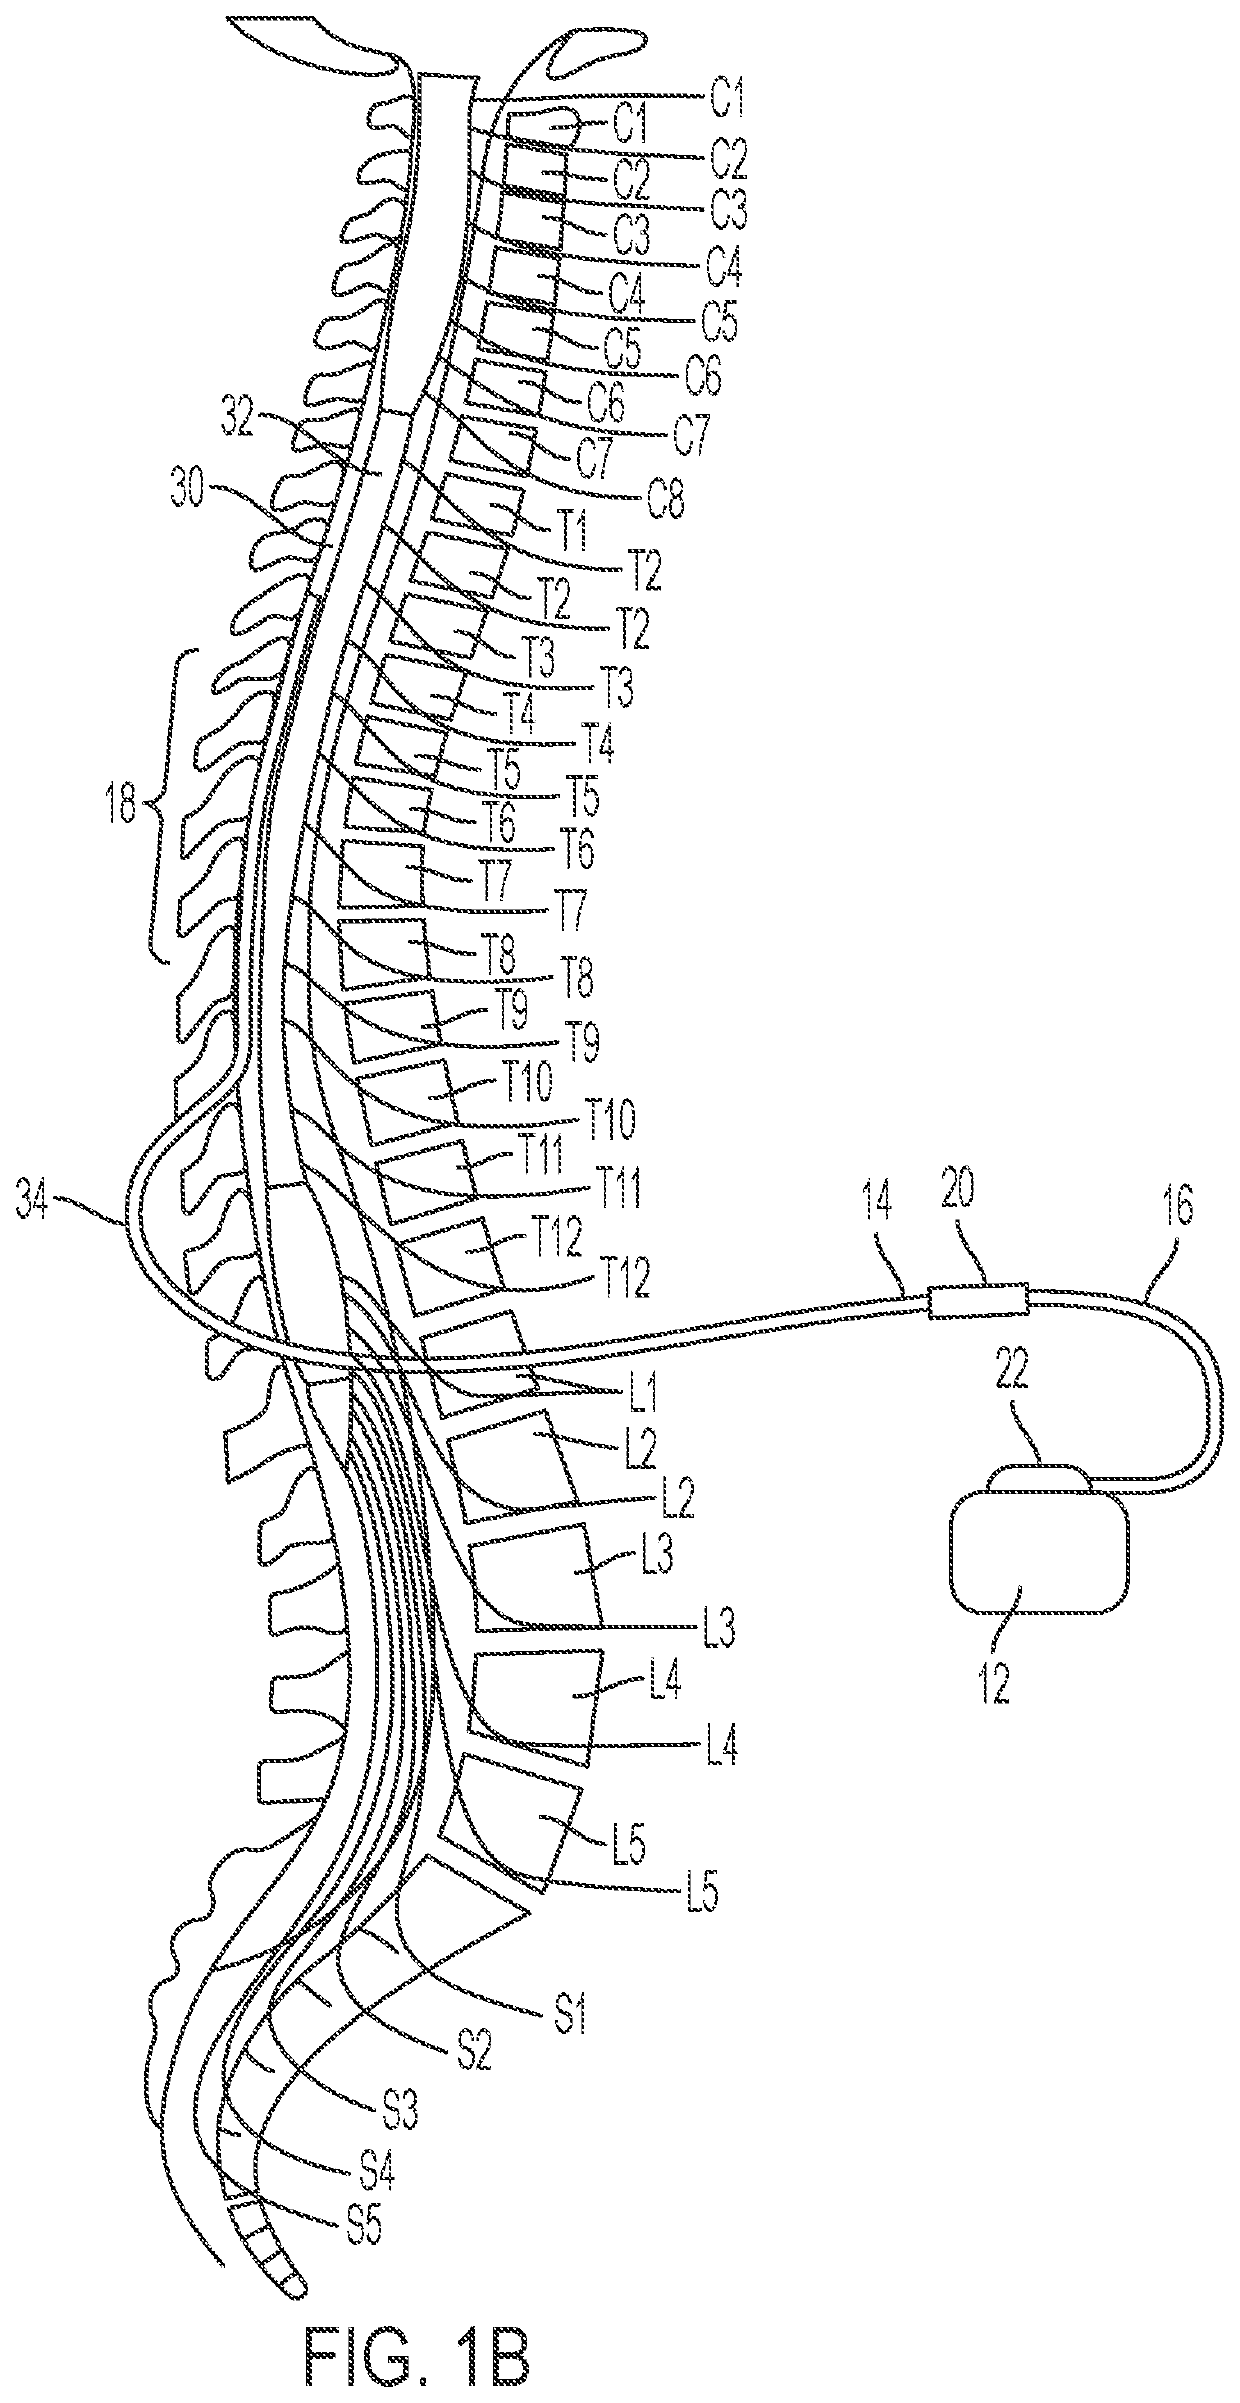 Bulkhead anchor for medical device leads